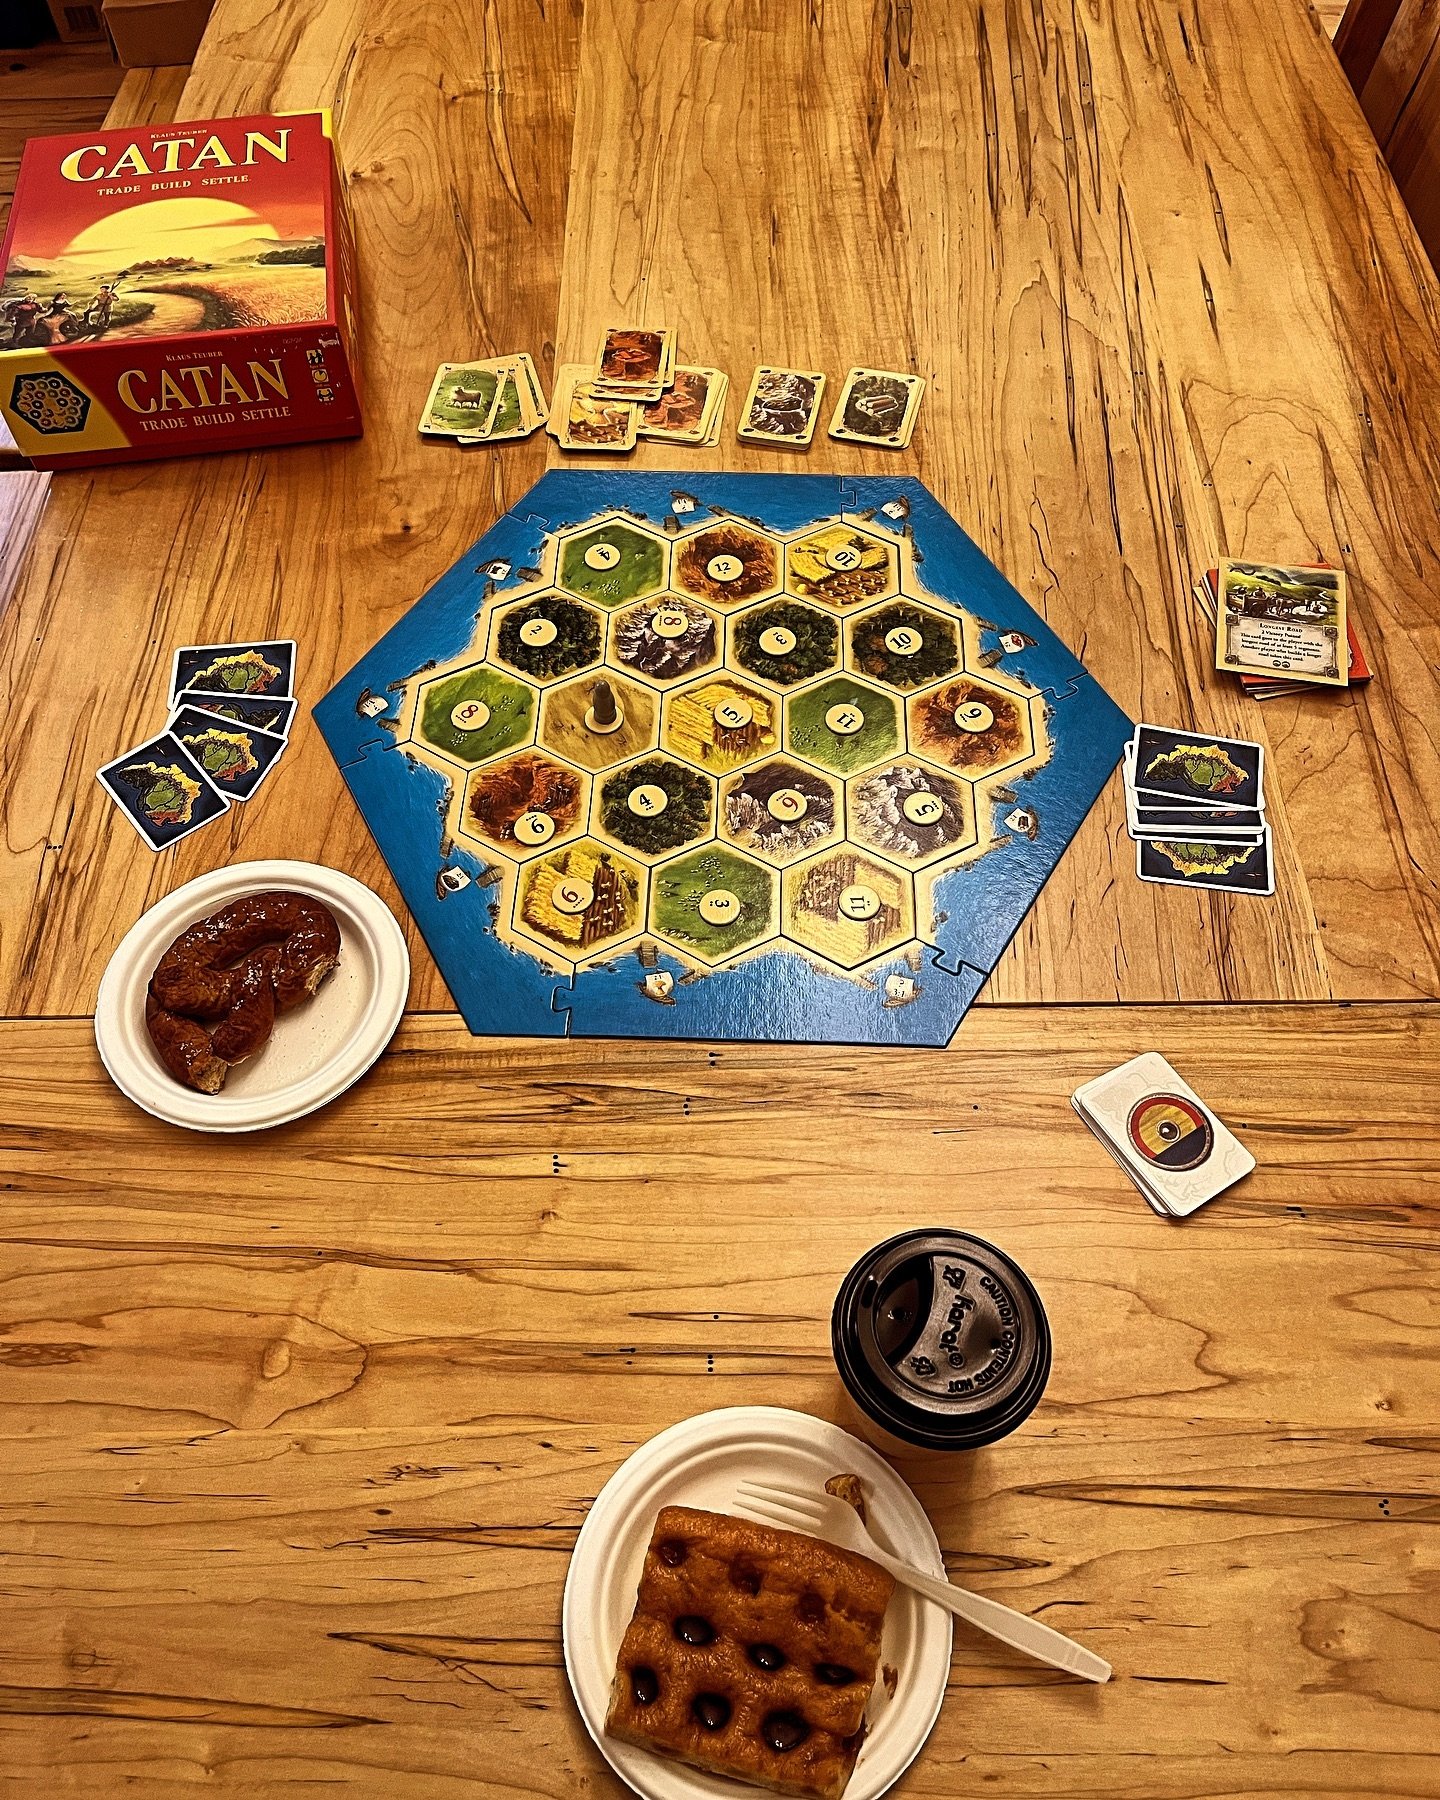 &ldquo;I&rsquo;ll trade you sheep 🐑and some wheat 🌾for that coffee and sugar cake!&rdquo; - Words from an unsuccessful trade offer in Catan. 

Community comes in many forms, and games are one of them! Our space is perfect to gather and have fun wit